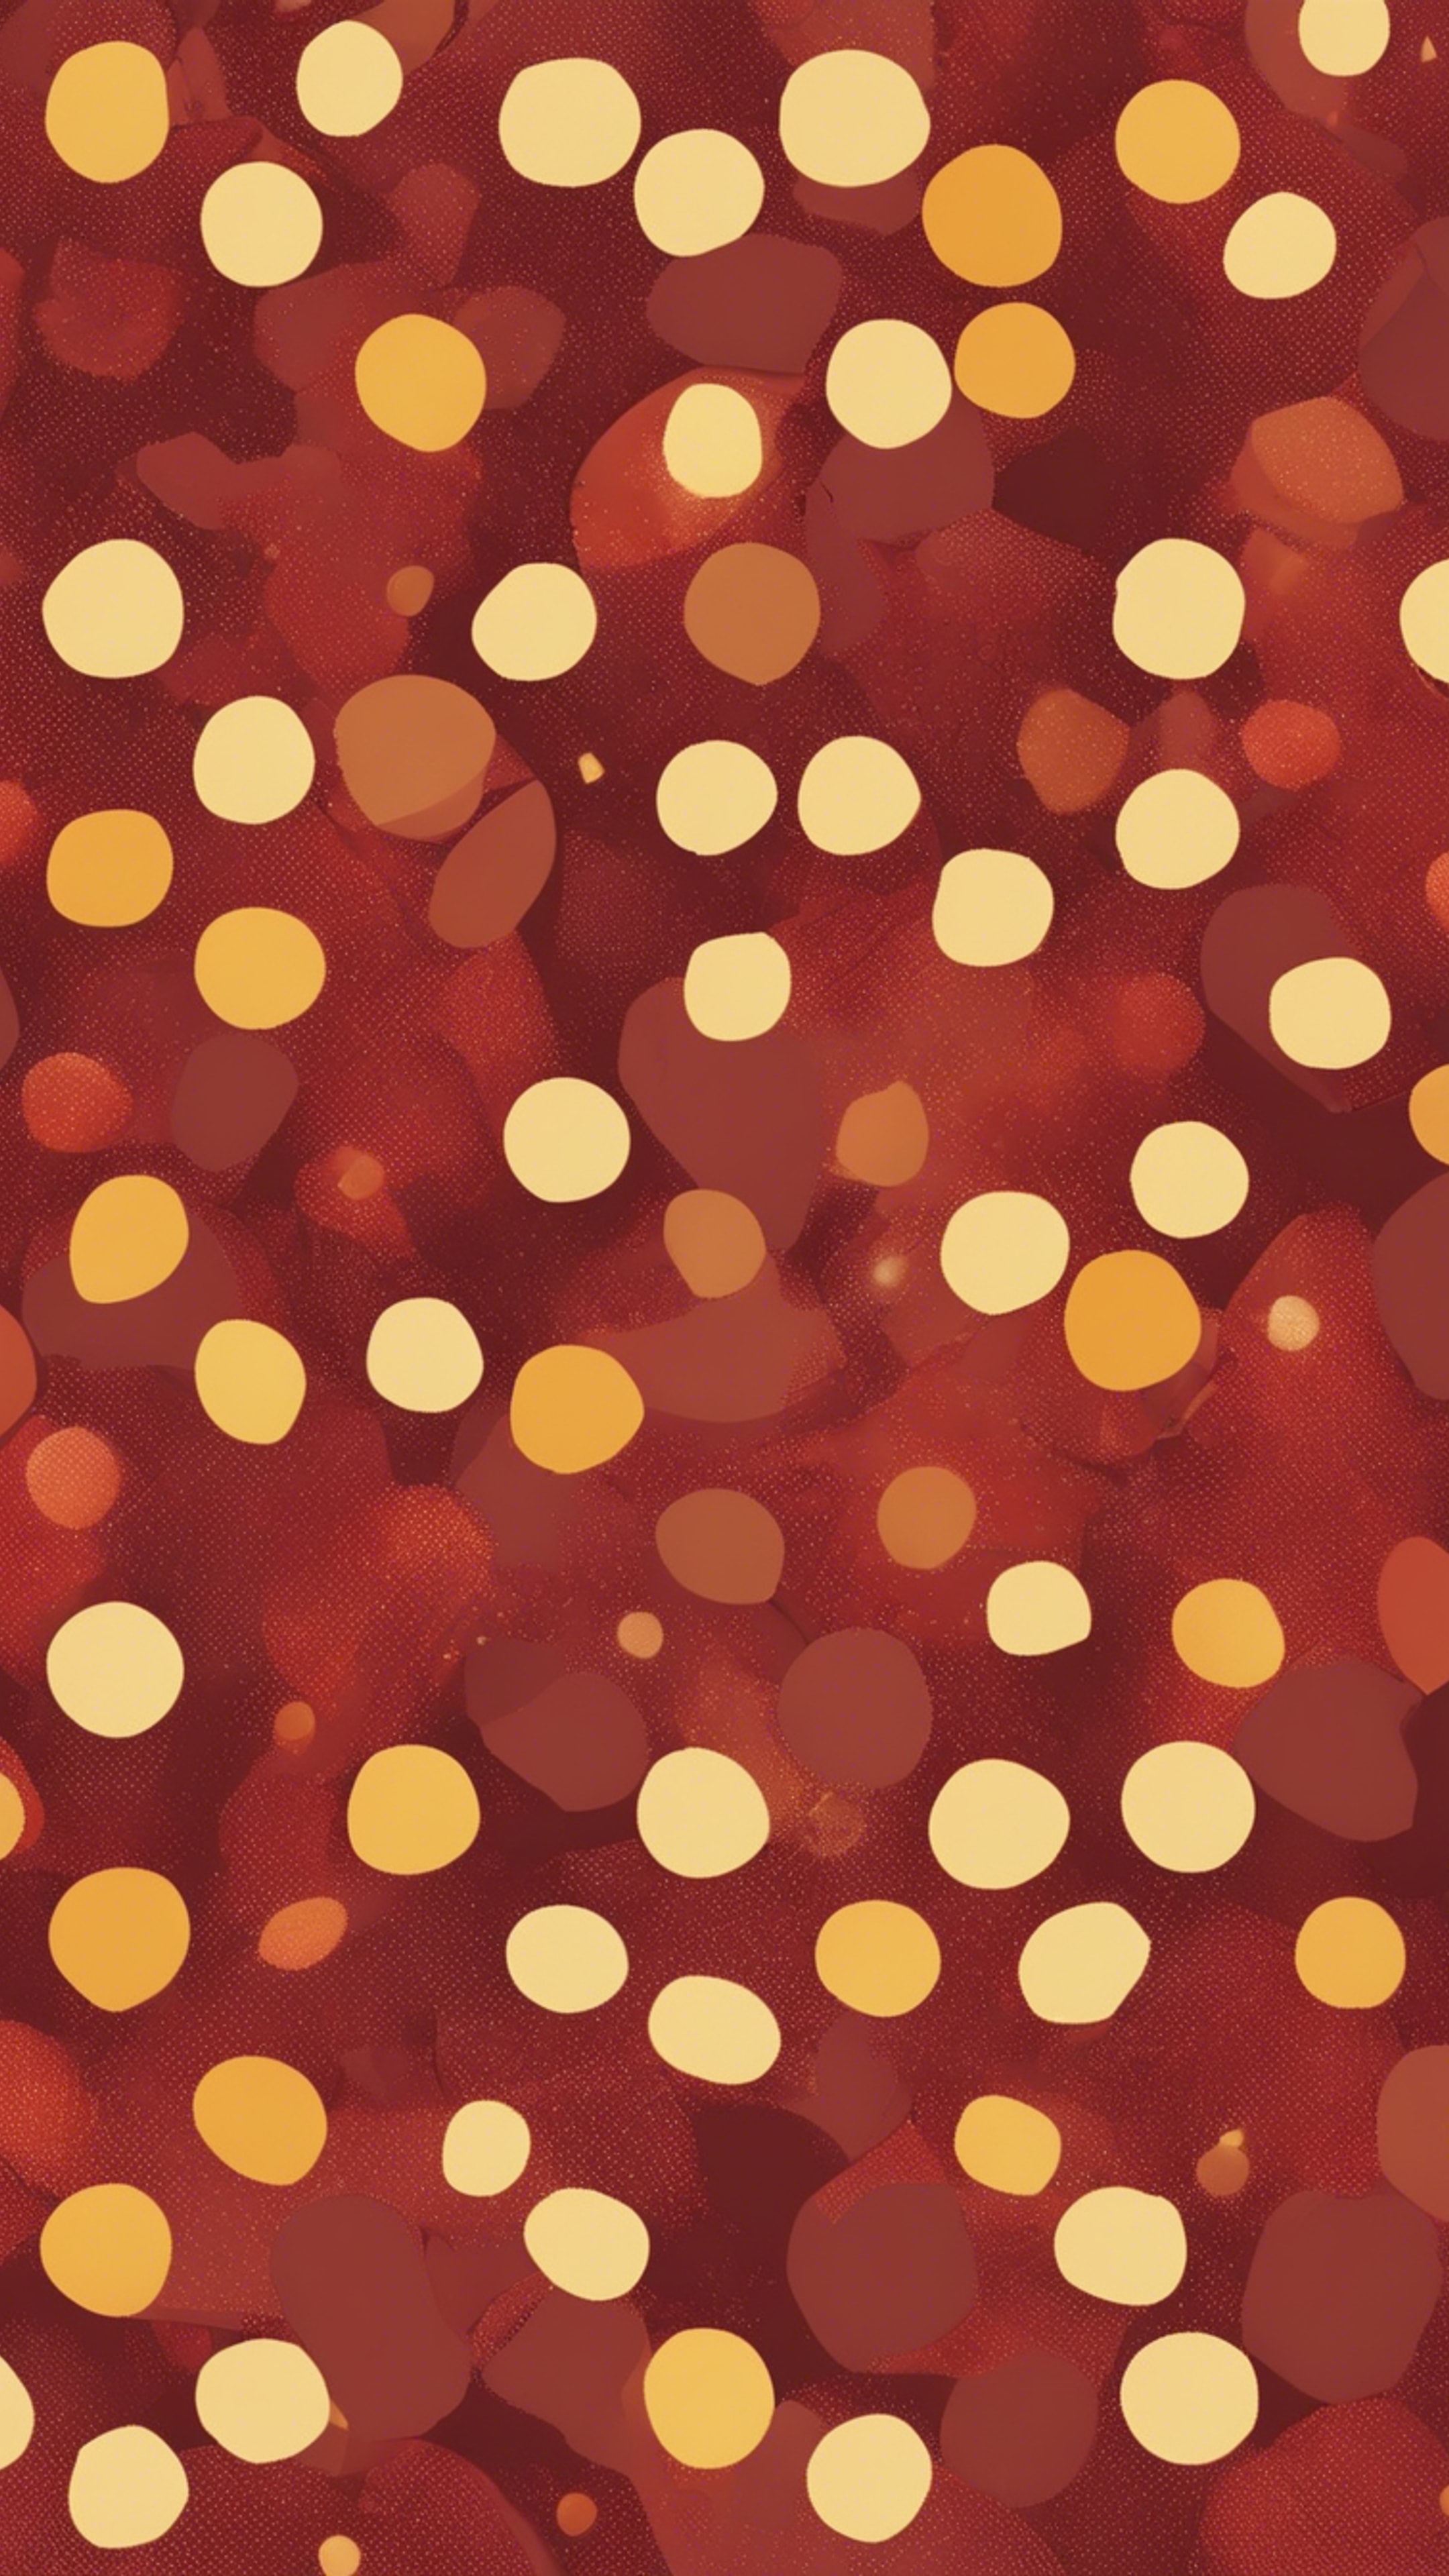 Polka dots, some crimson red, some amber yellow, all over the endless pattern.壁紙[2c2e71e3370647e4a097]